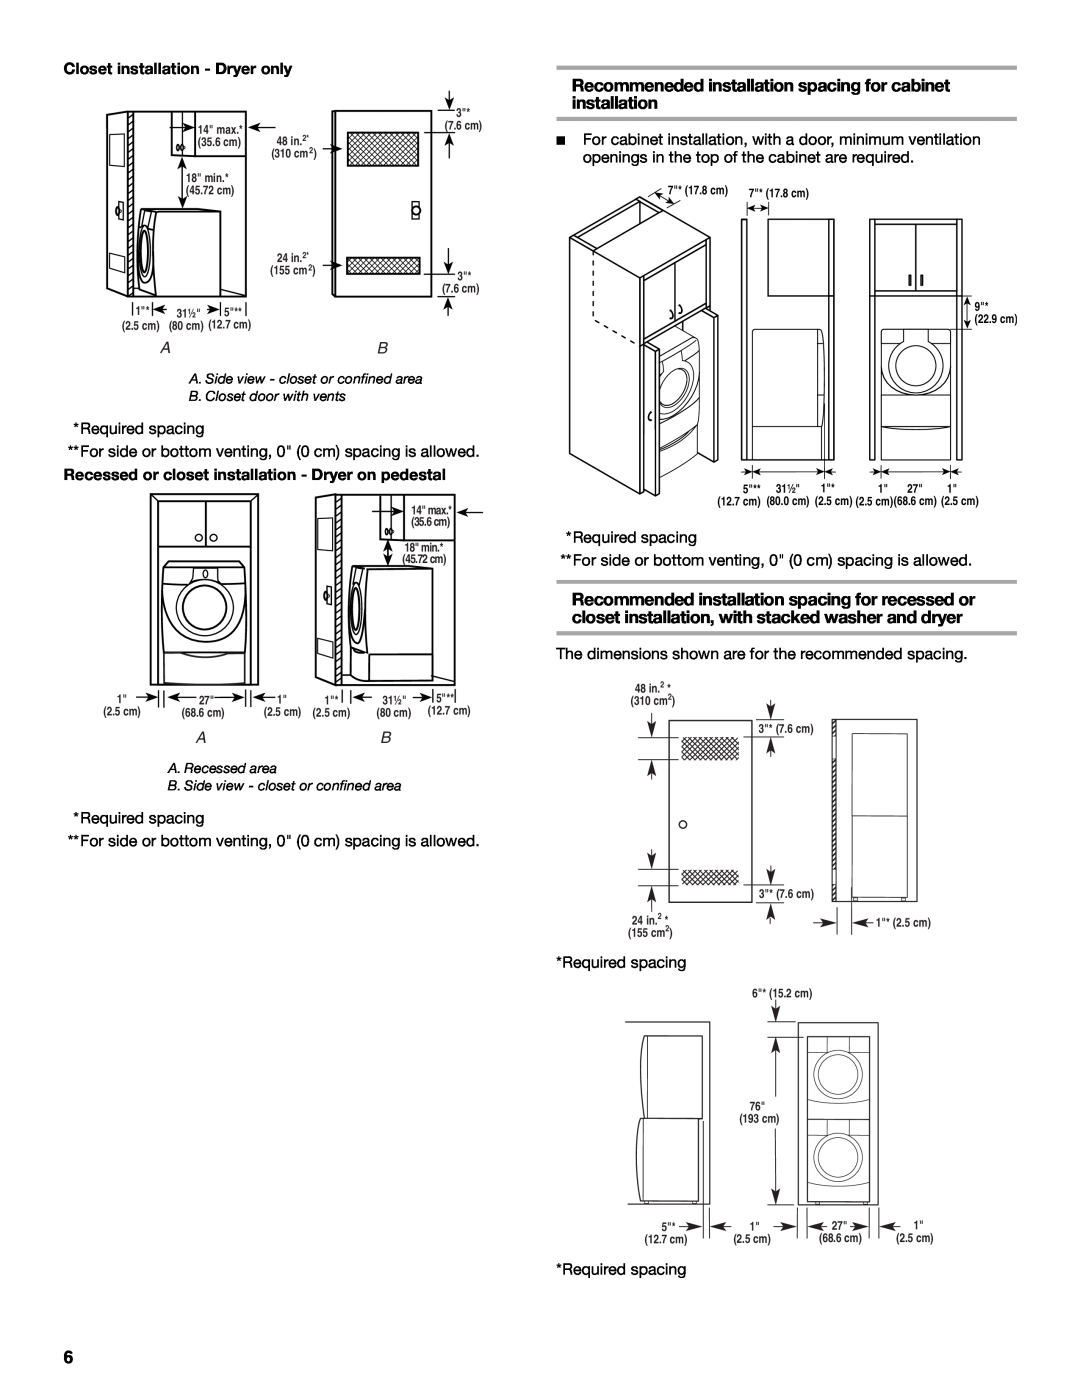 Maytag W10099070 manual Recommeneded installation spacing for cabinet, Closet installation - Dryer only 